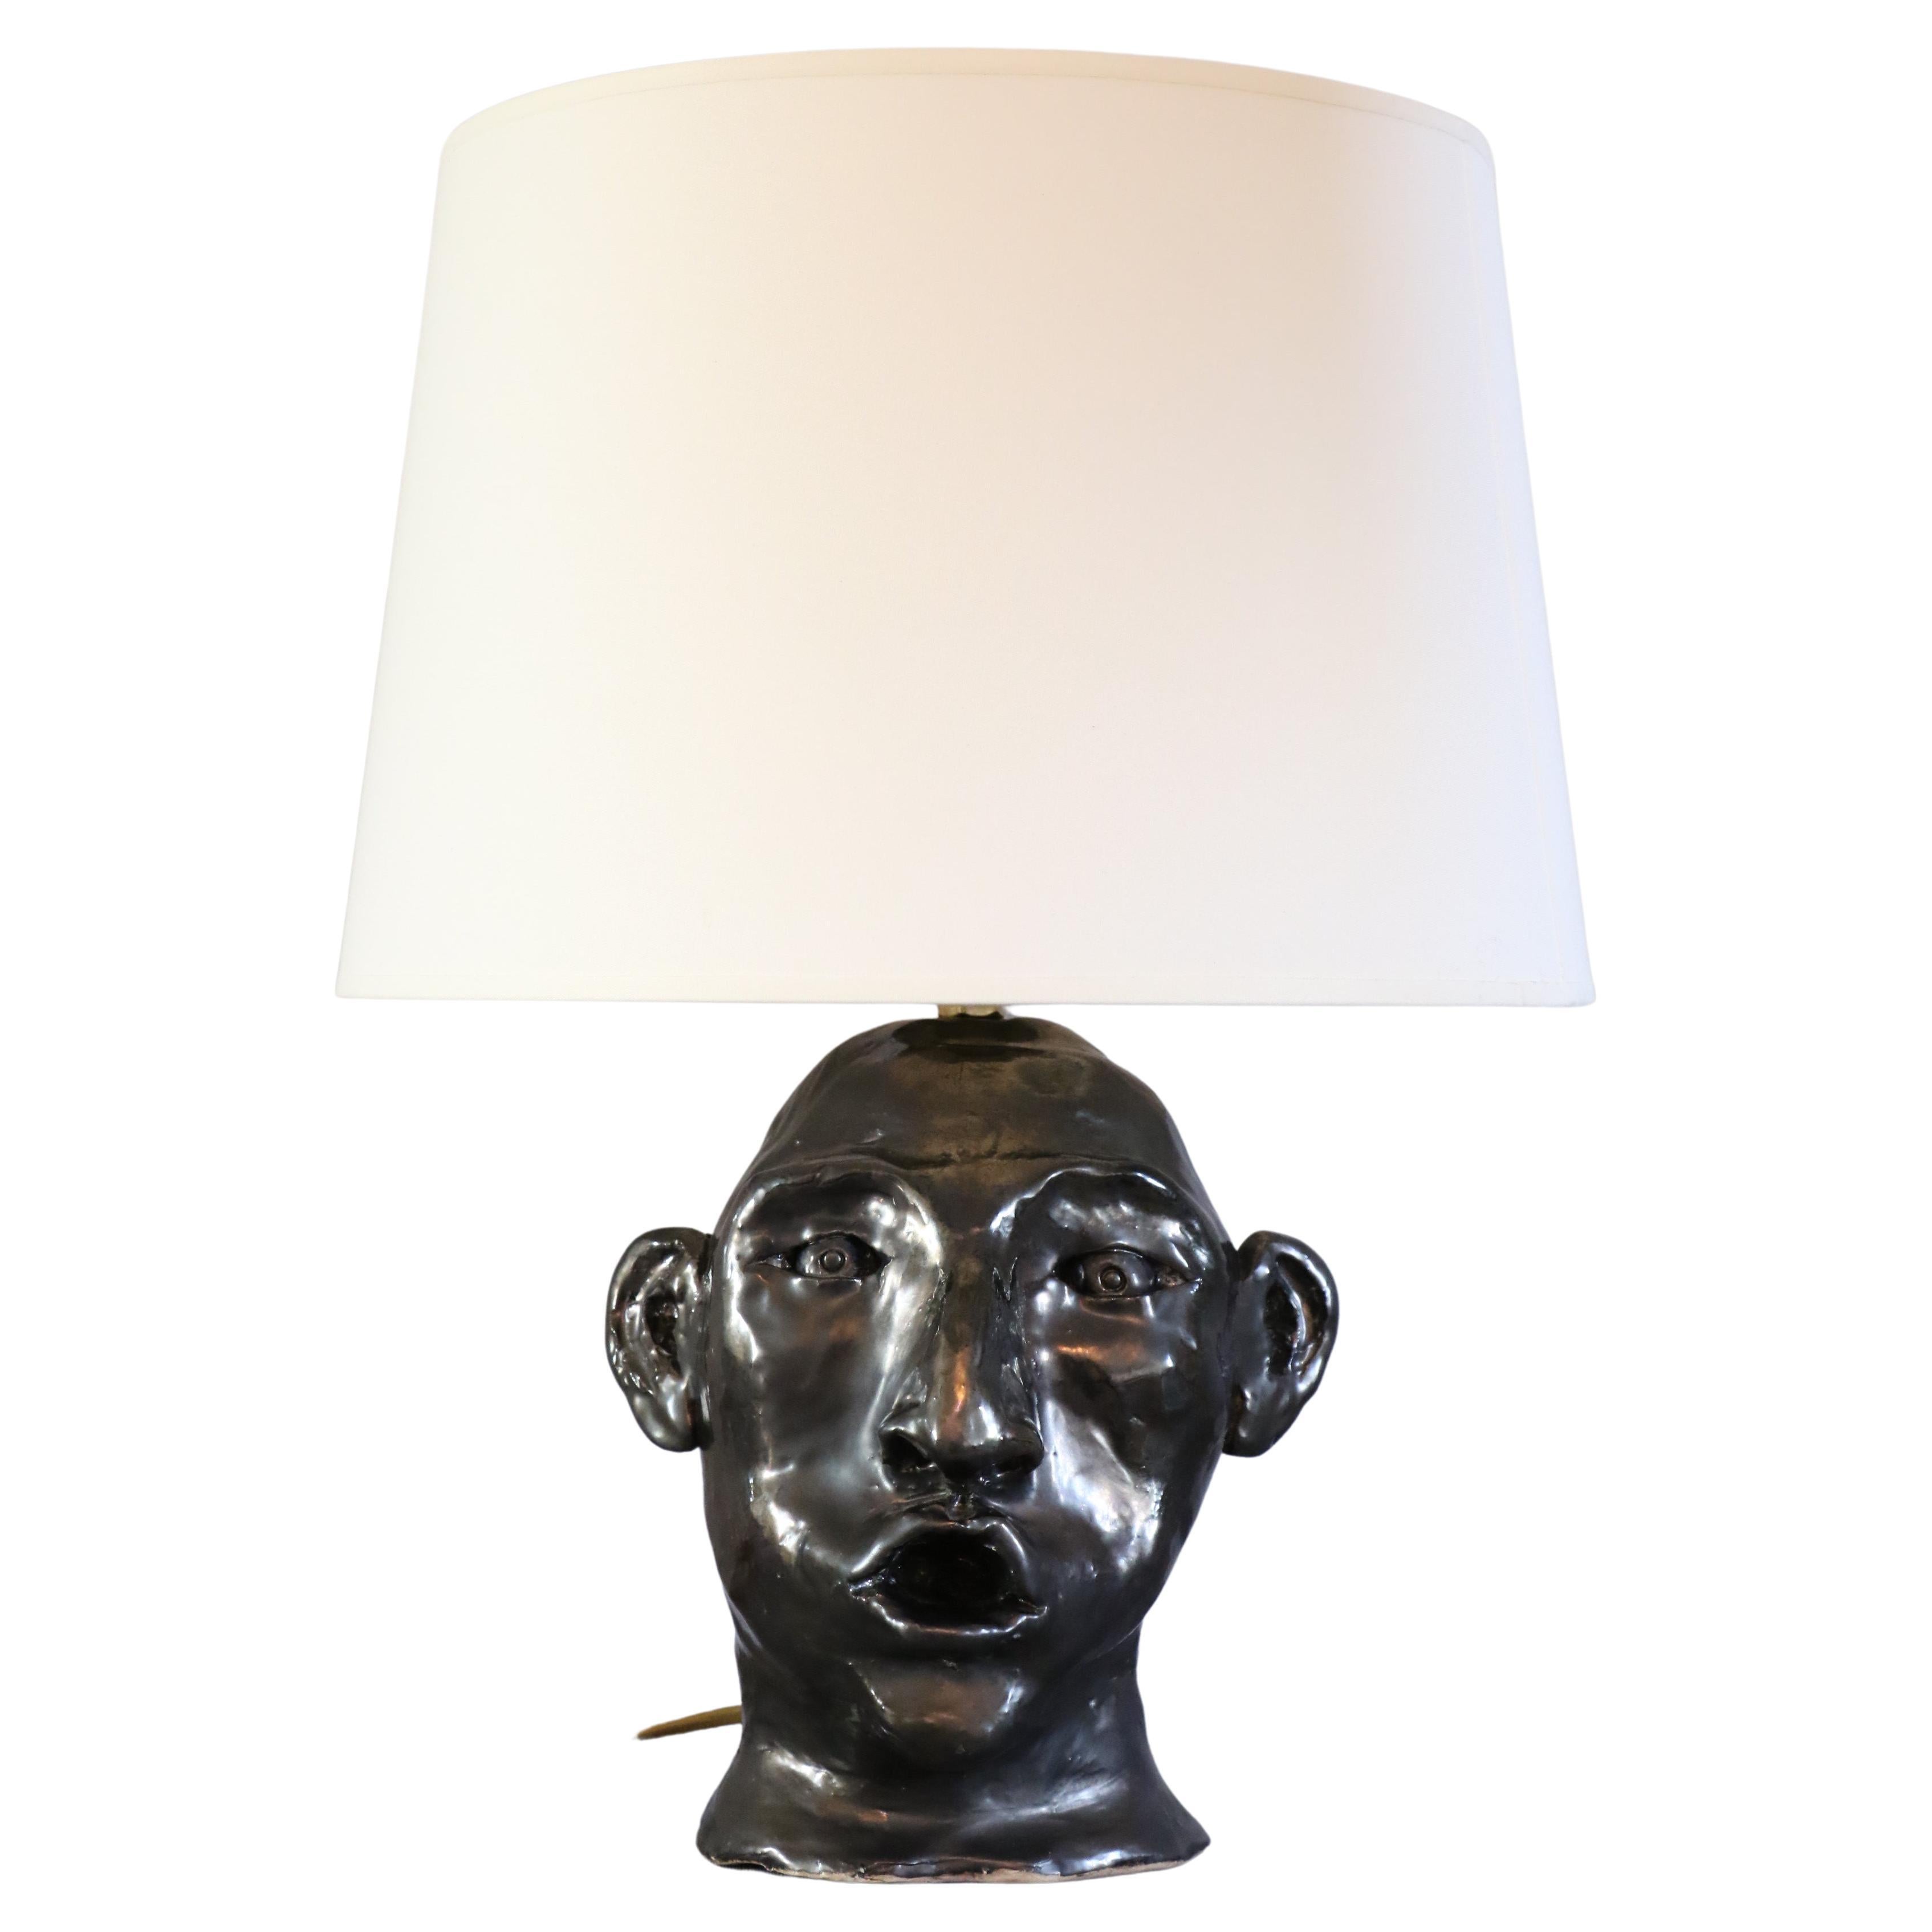 1950s French ceramic lamp with face decoration in the style of Georges Jouve